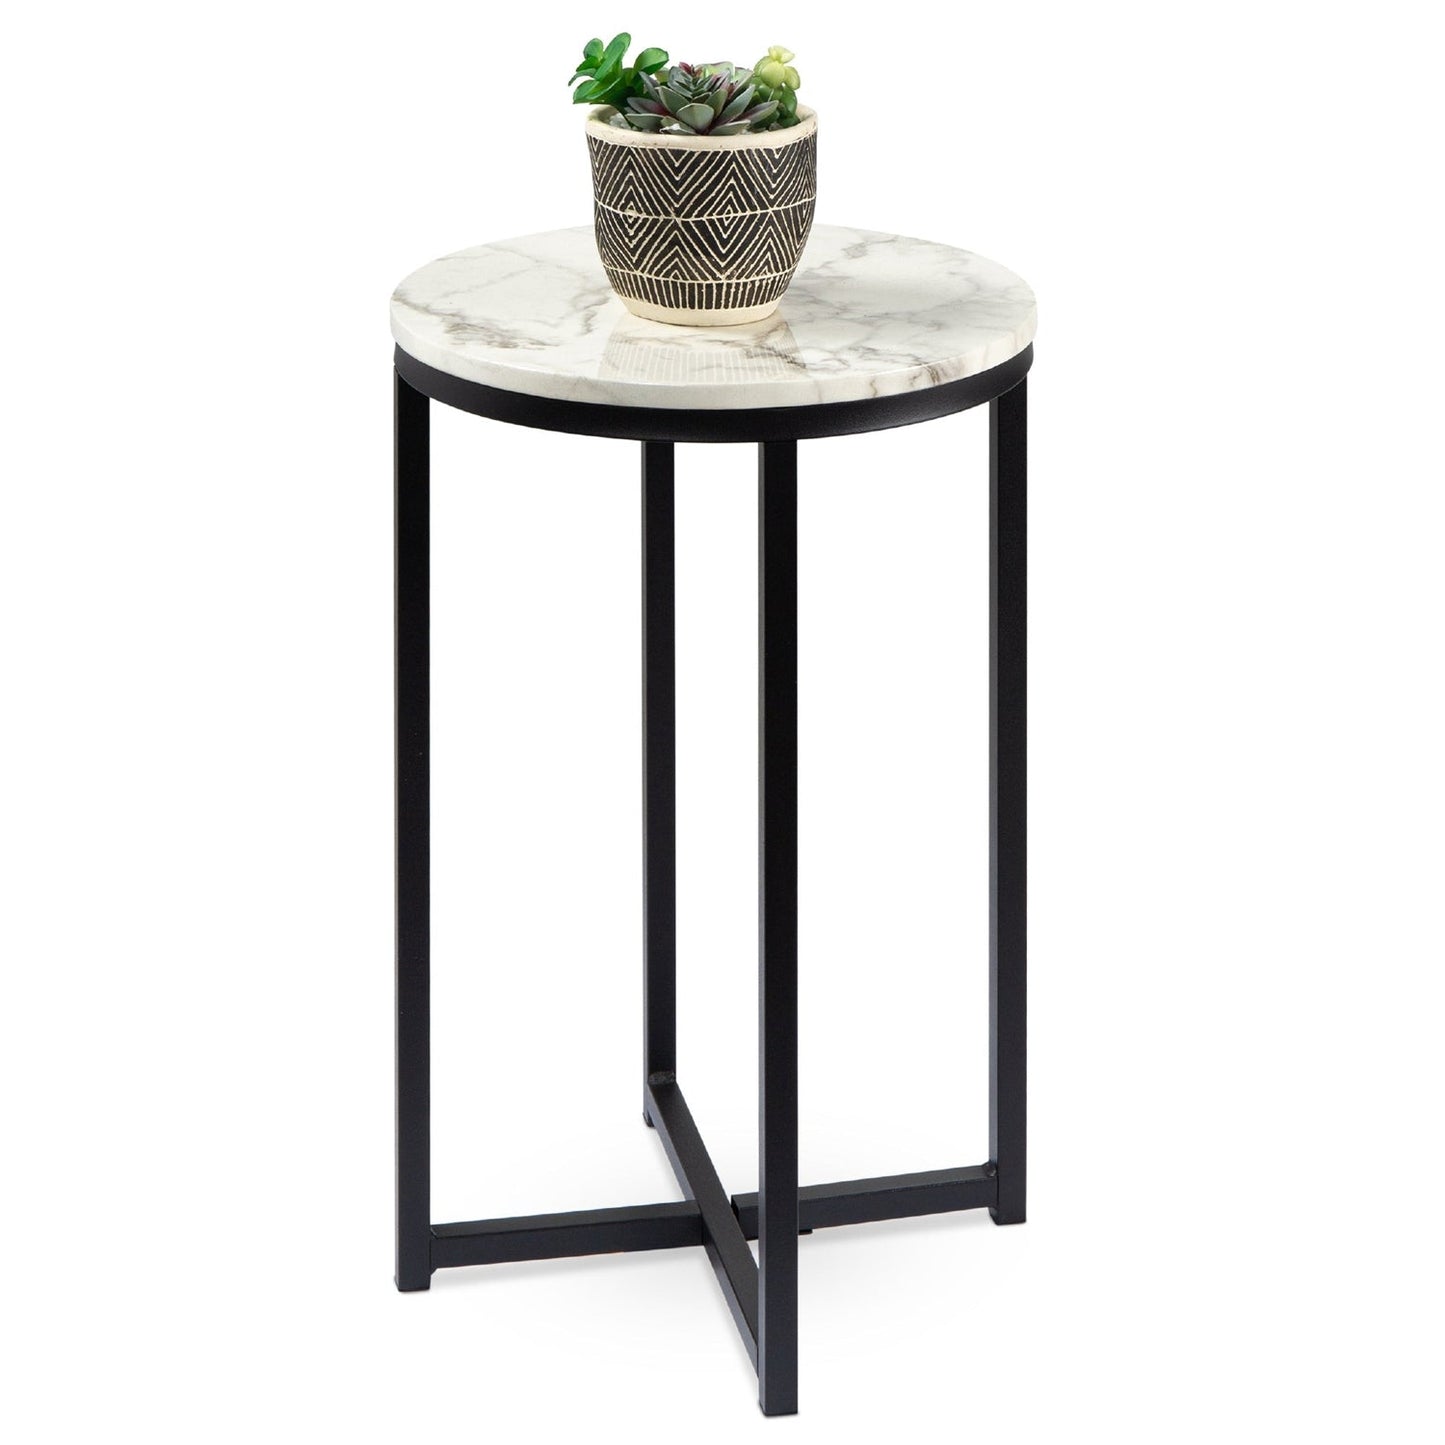 Bedroom > Nightstand And Dressers - Round Cross Leg Design Coffee Side Table Nightstand With Faux Marble Top White/Matte Black